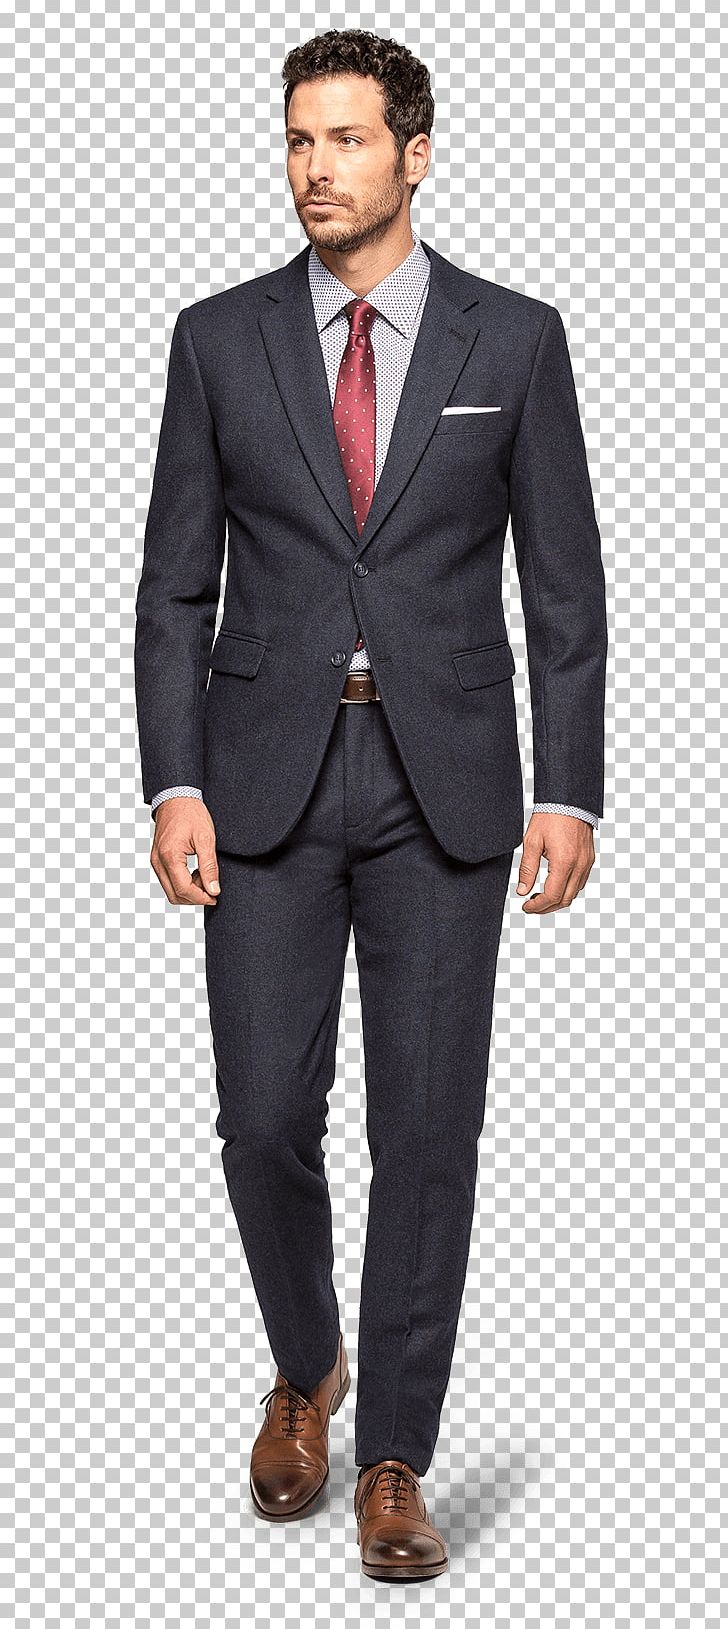 Kurt Angle Blazer Suit Jacket JoS. A. Bank Clothiers PNG, Clipart, Blazer, Blue, Business, Businessperson, Clothing Free PNG Download